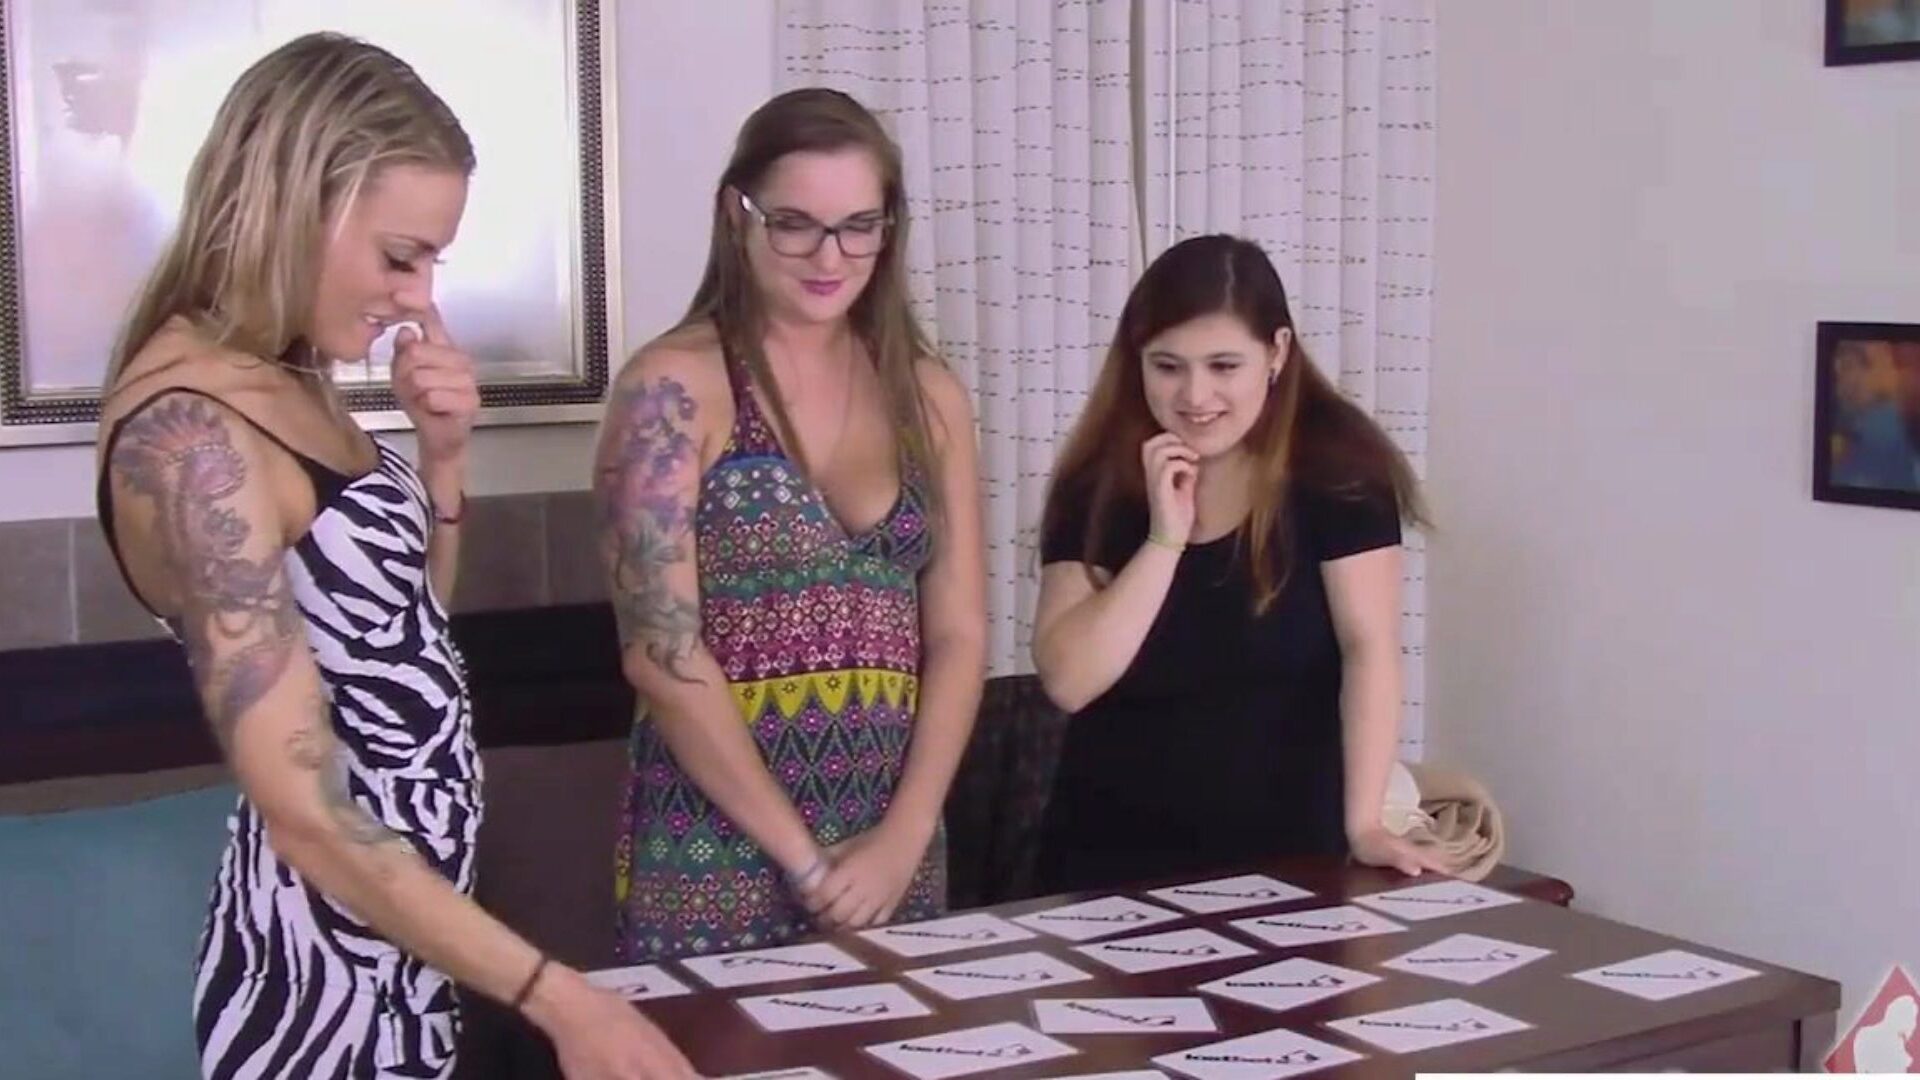 3 Gorgeous Girls Find out Who has the Best Memory, and Least Clothes